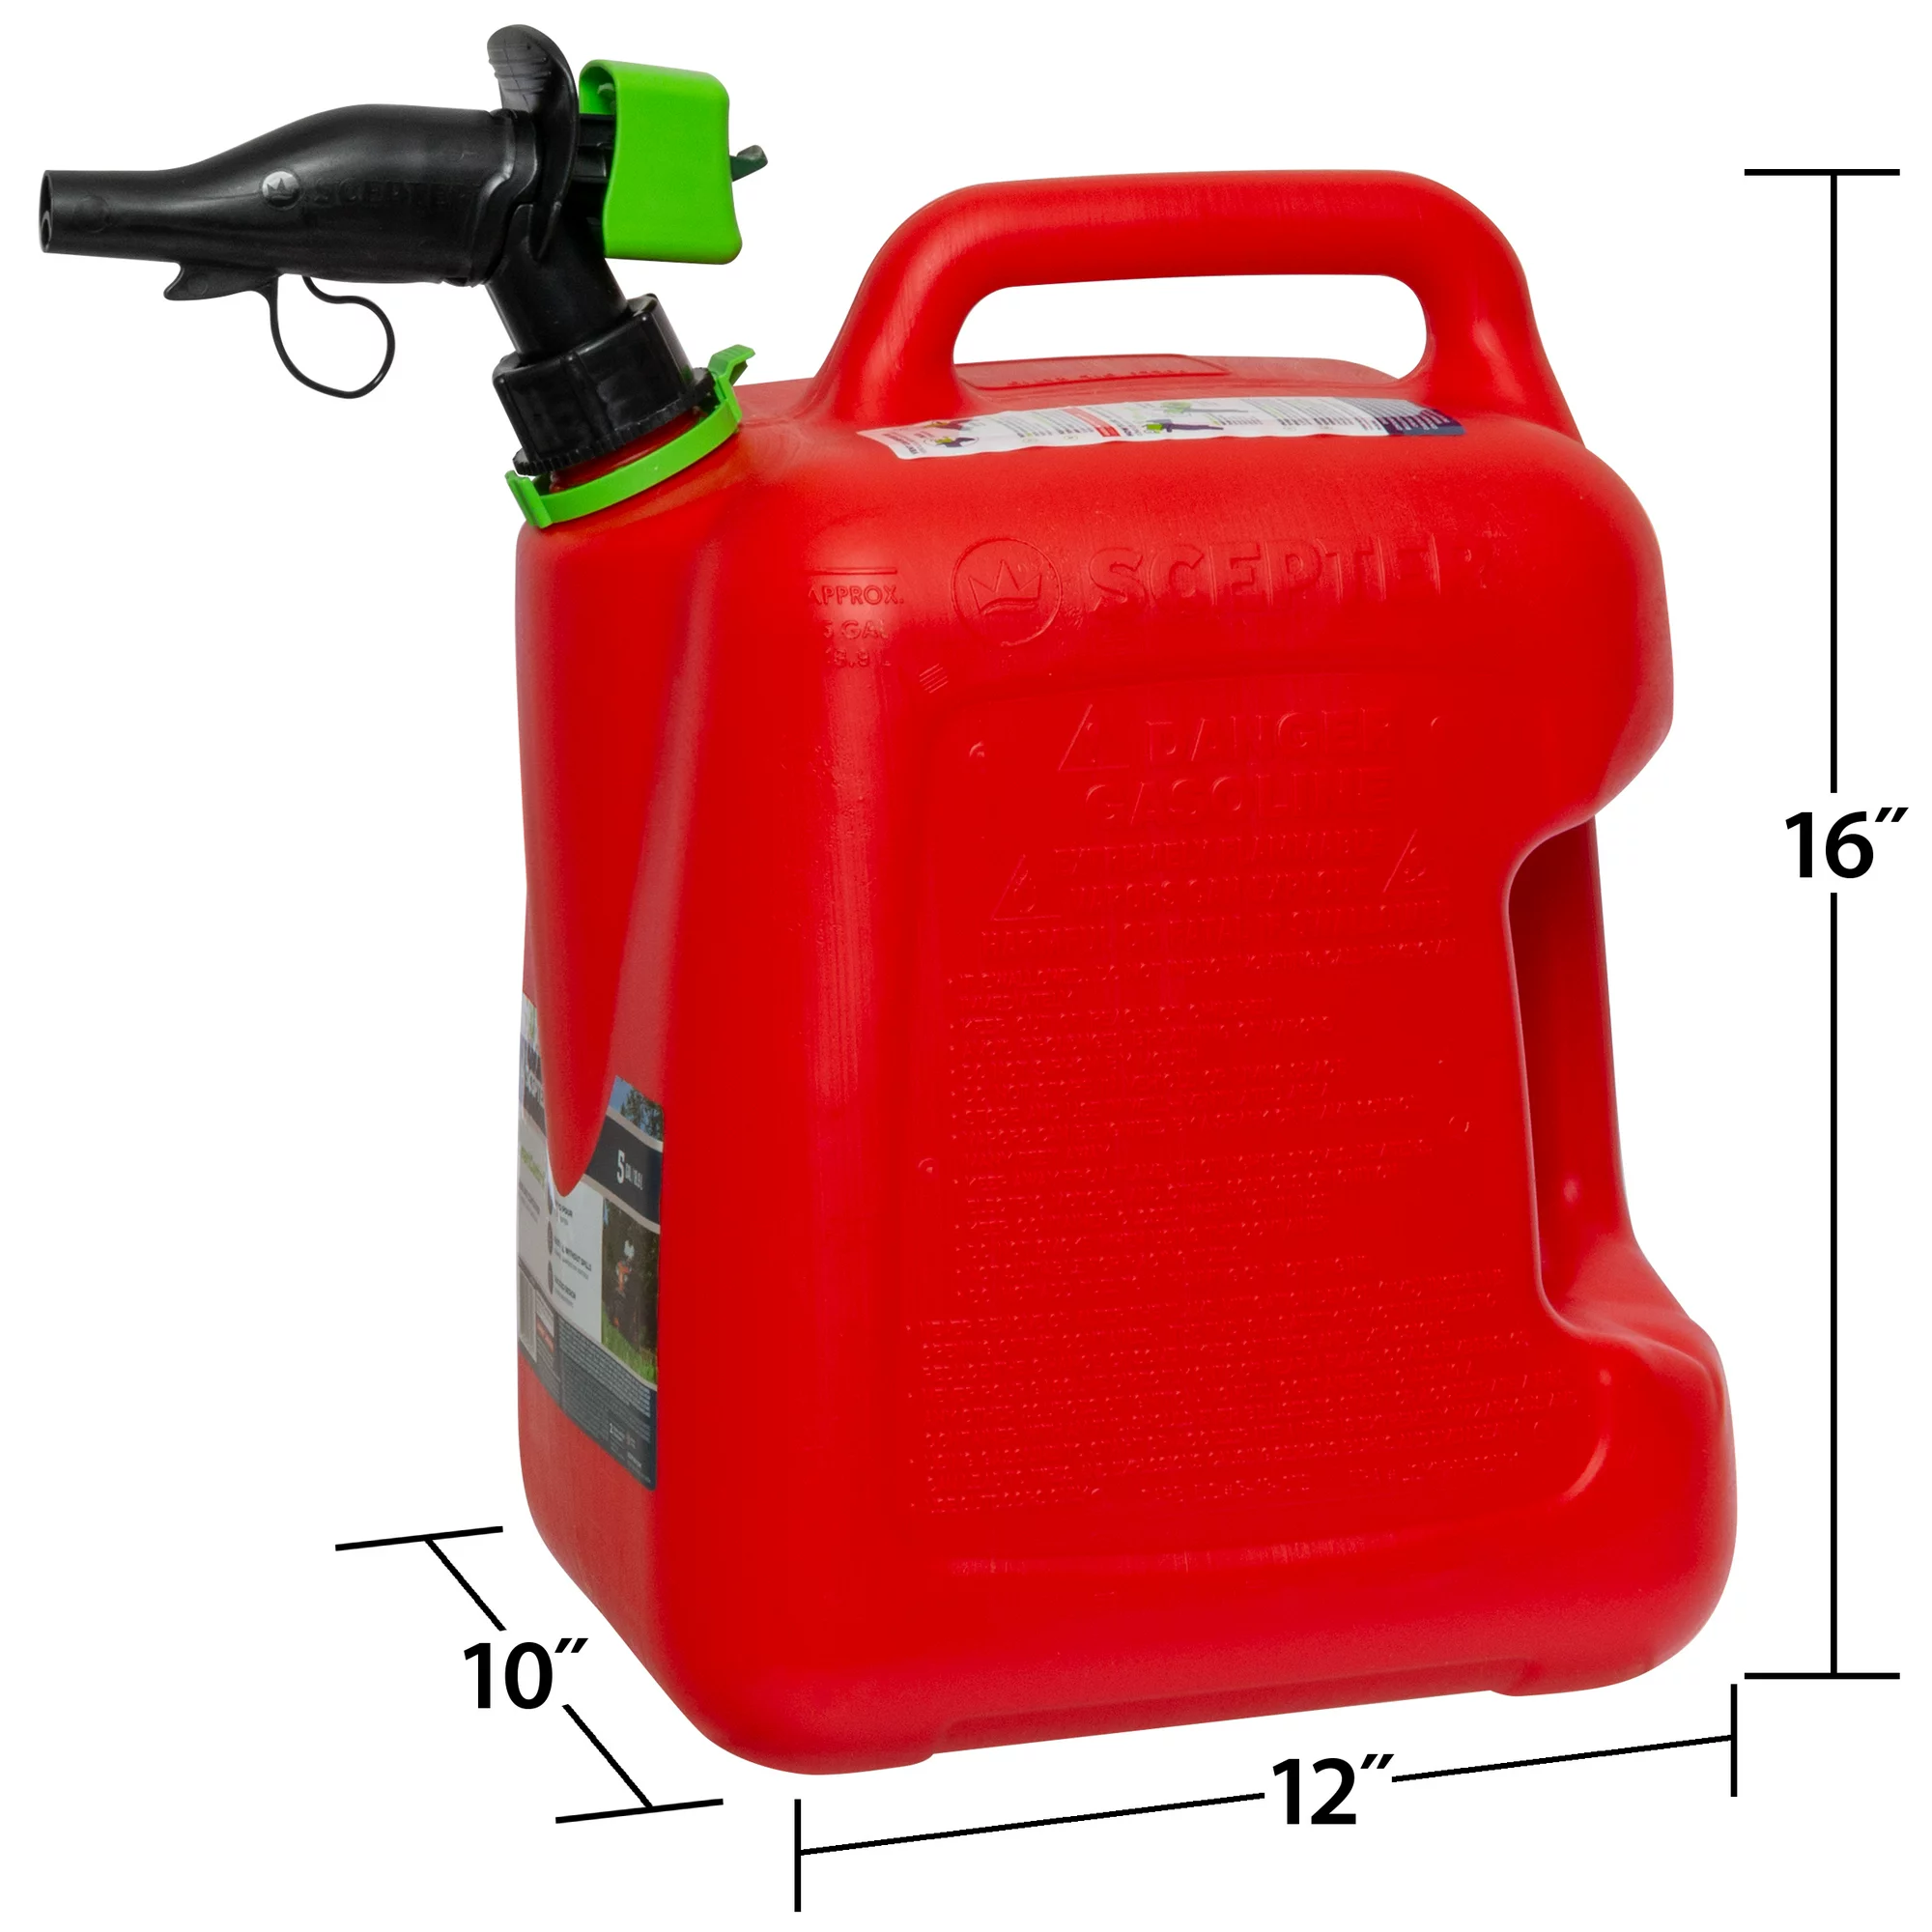 Scepter 5 Gallon SmartControl Gas Can with Rear Handle， FSCG502， Red Fuel Container